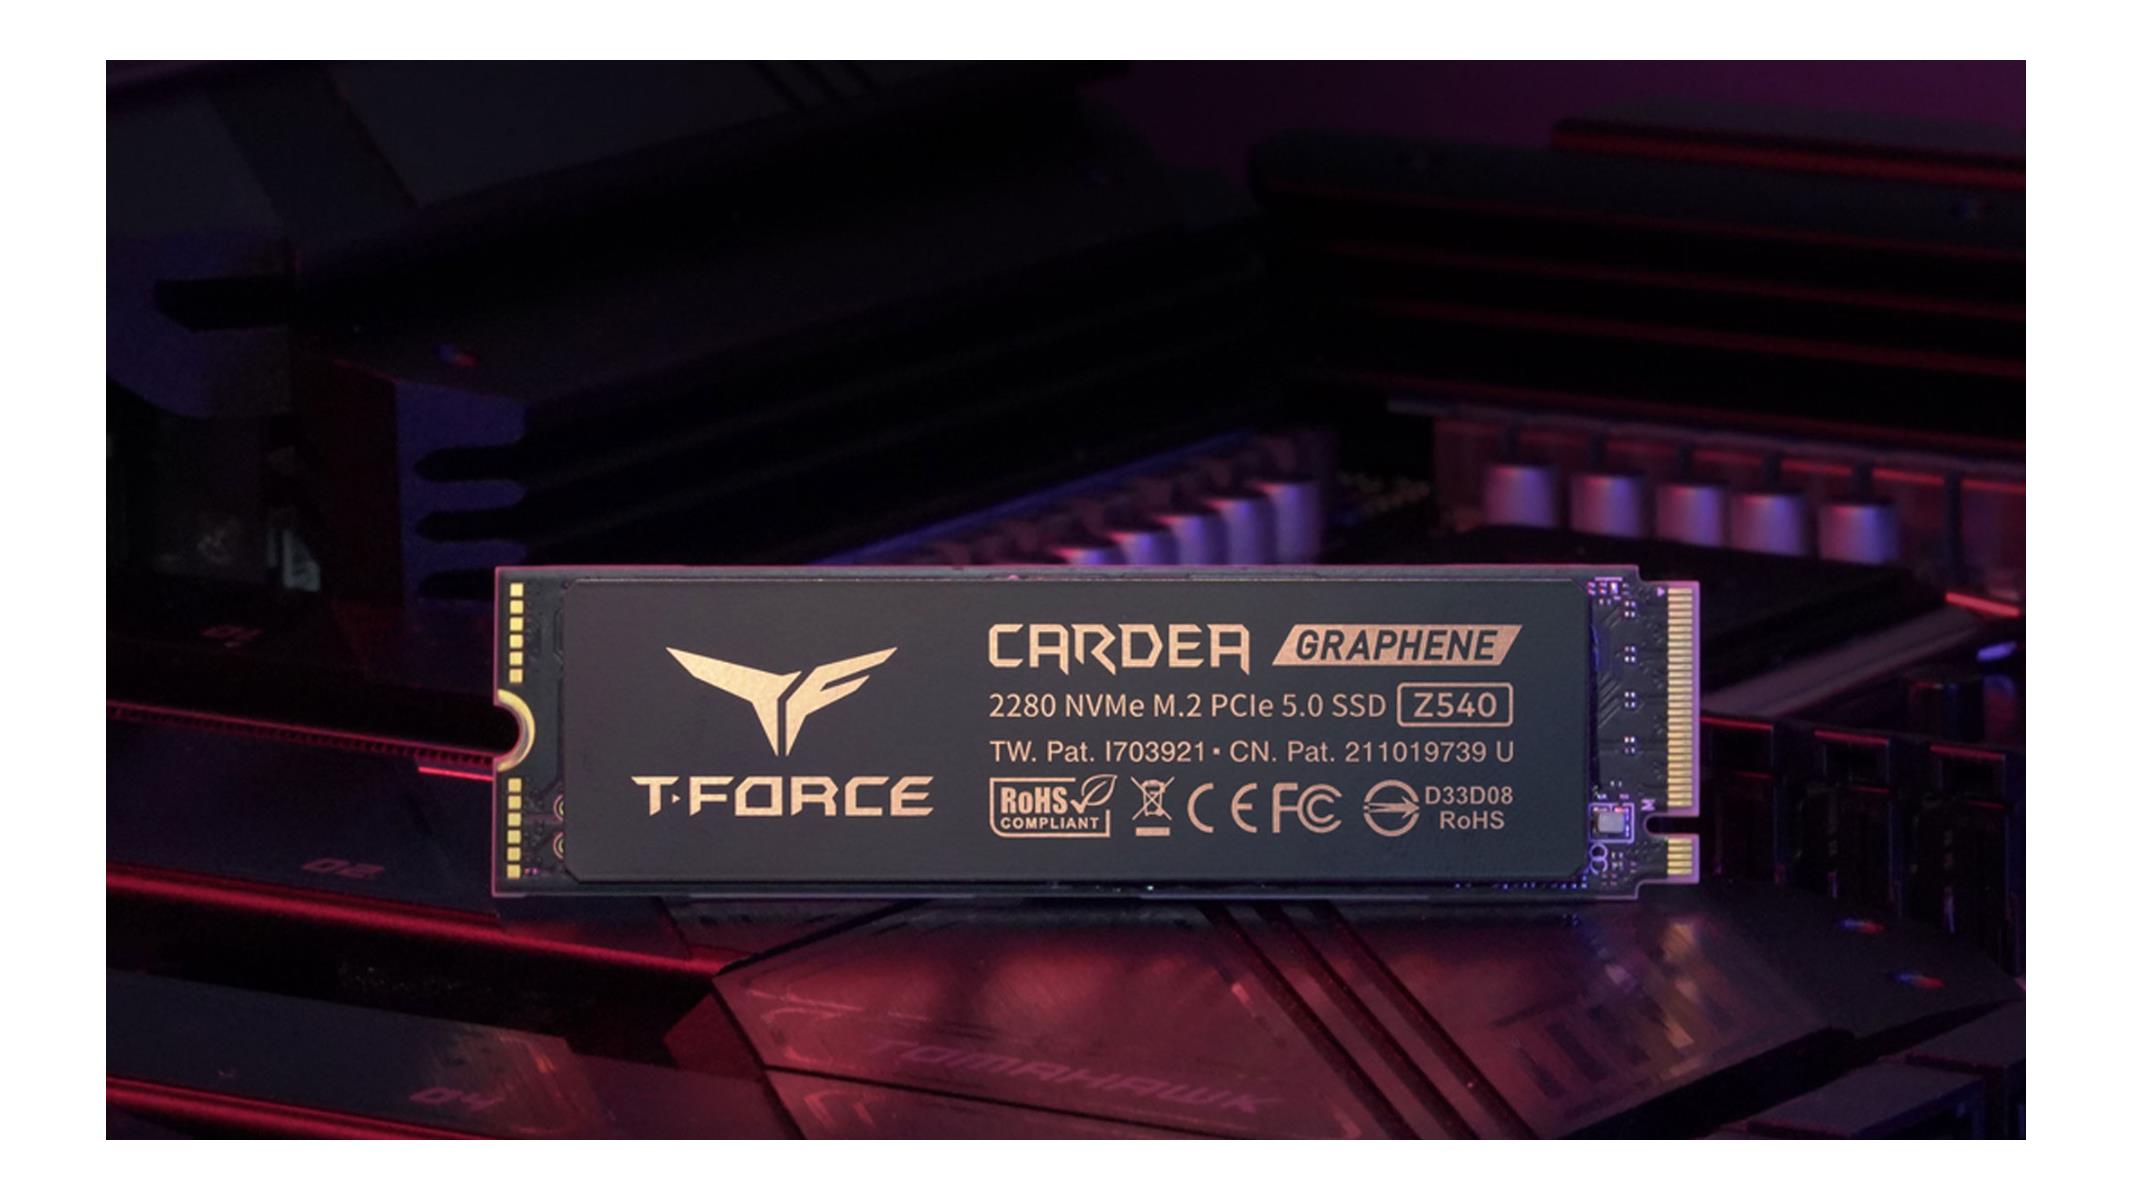 TeamGroup's latest PCIe 5.0 SSD has been revealed - and with some seriously  fast specs